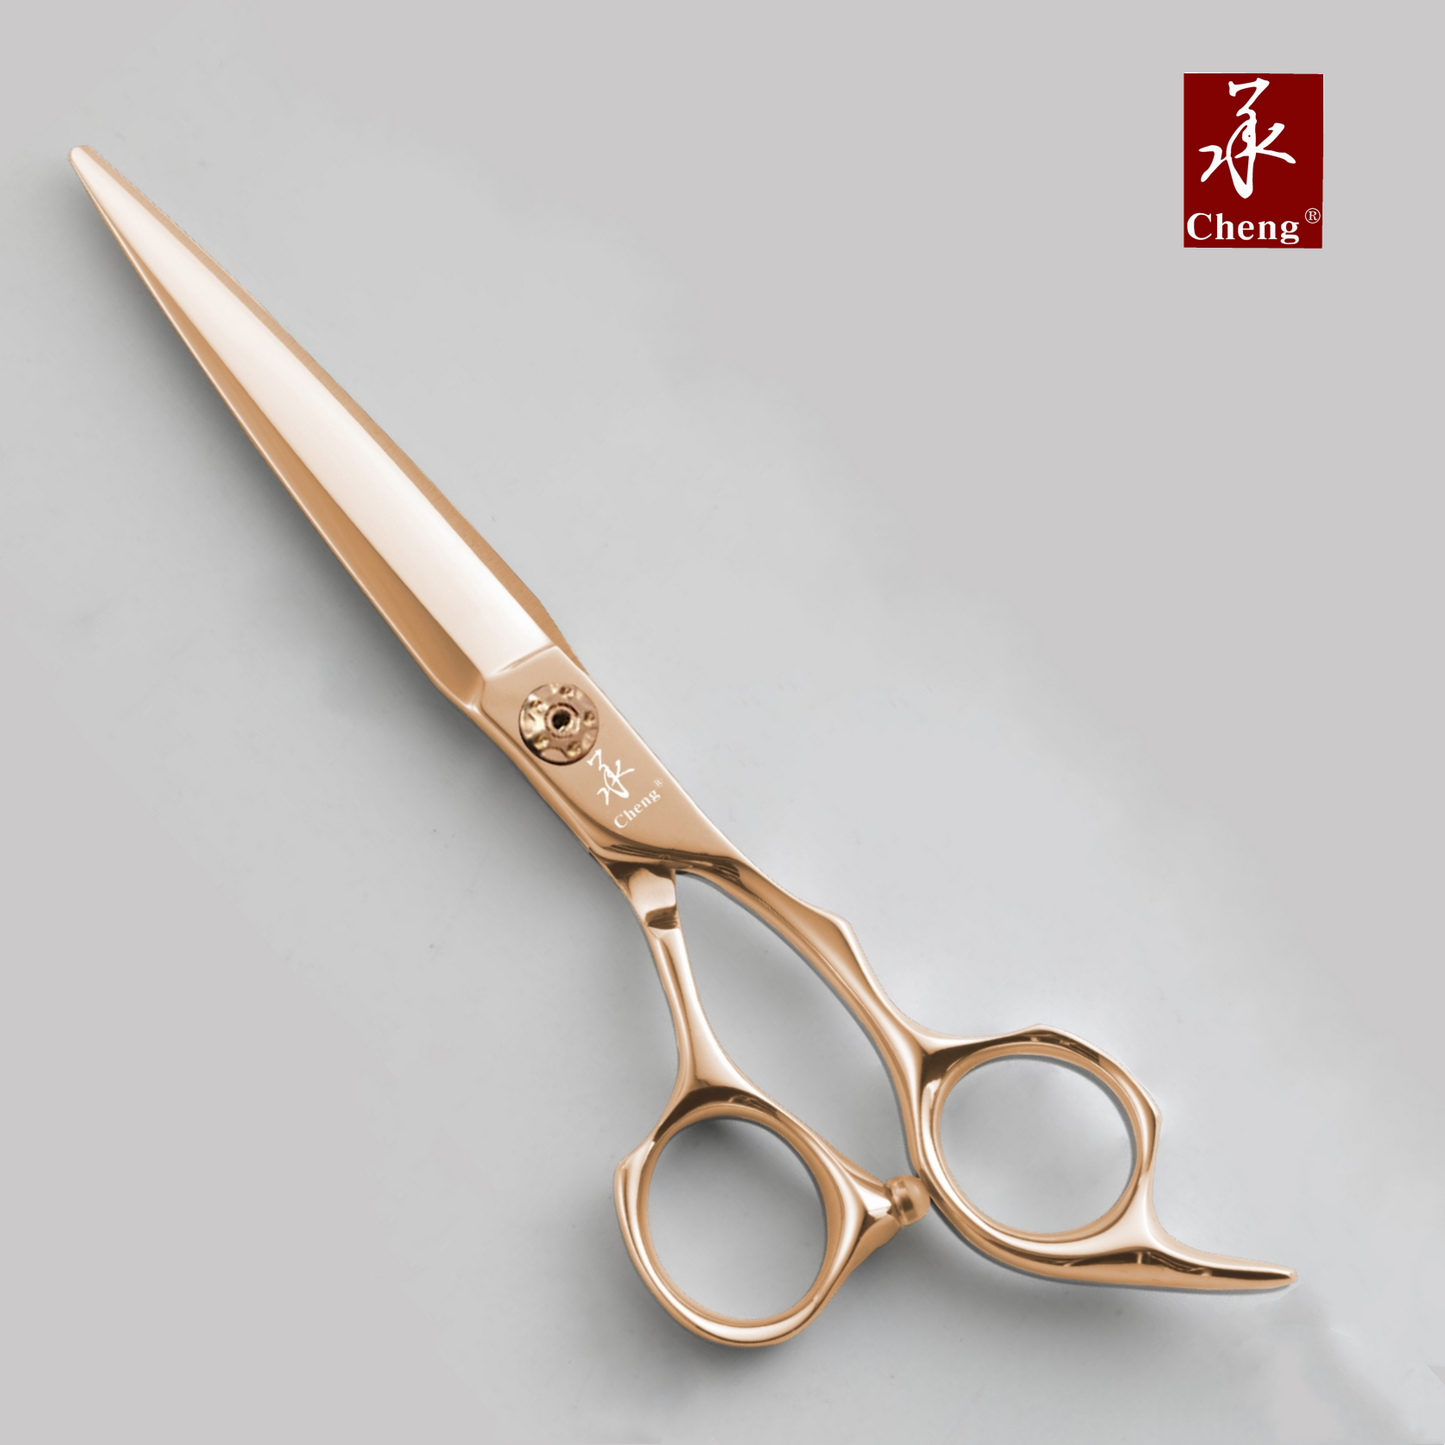 A1-6.8GD Hair Cutting Scissors 6.8 Inch Rose Gold Color